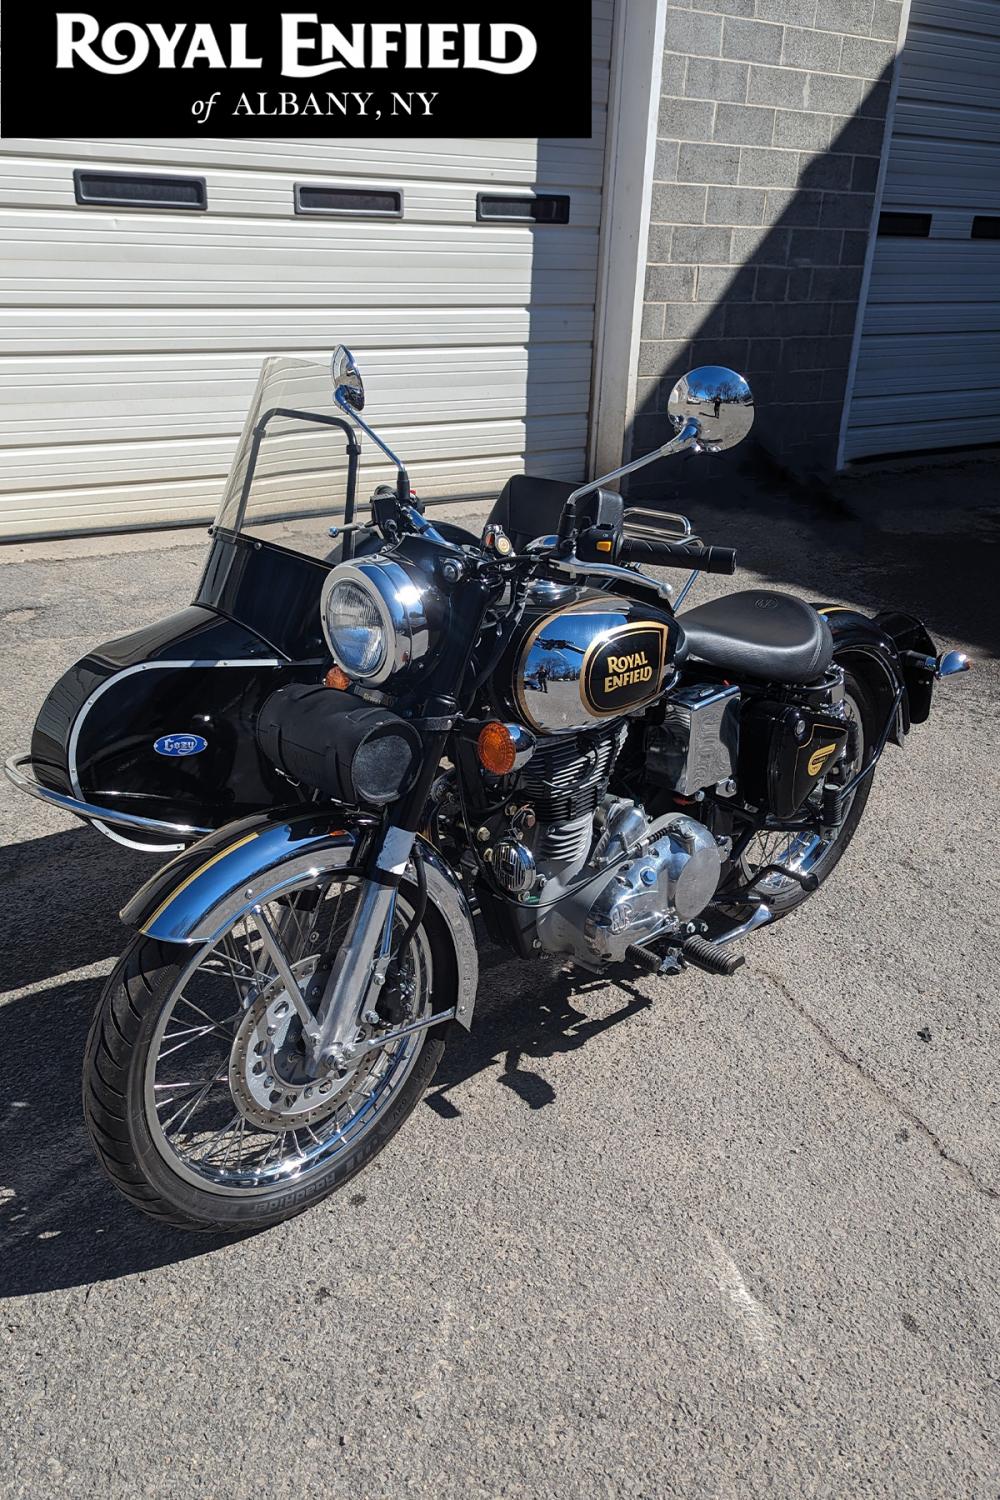 2017 Royal Enfield Classic 500 with Sidecar- PENDING SALE!